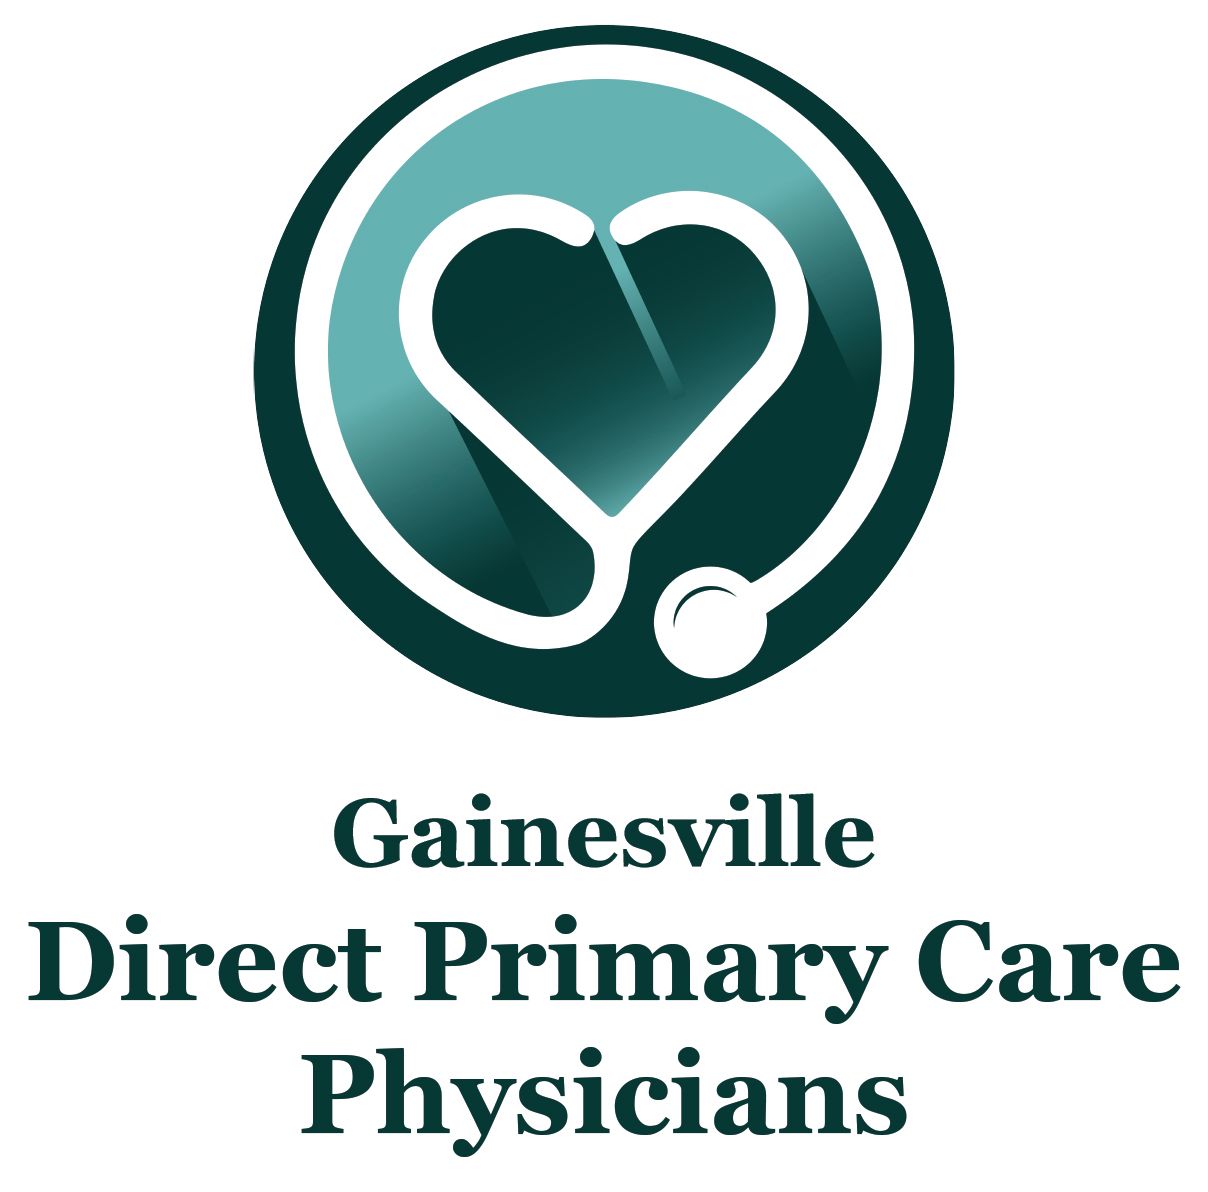 Gainesville Direct Primary Care Physicians Logo - Newberry, FL -  Gainesville Direct Primary Care Physicians